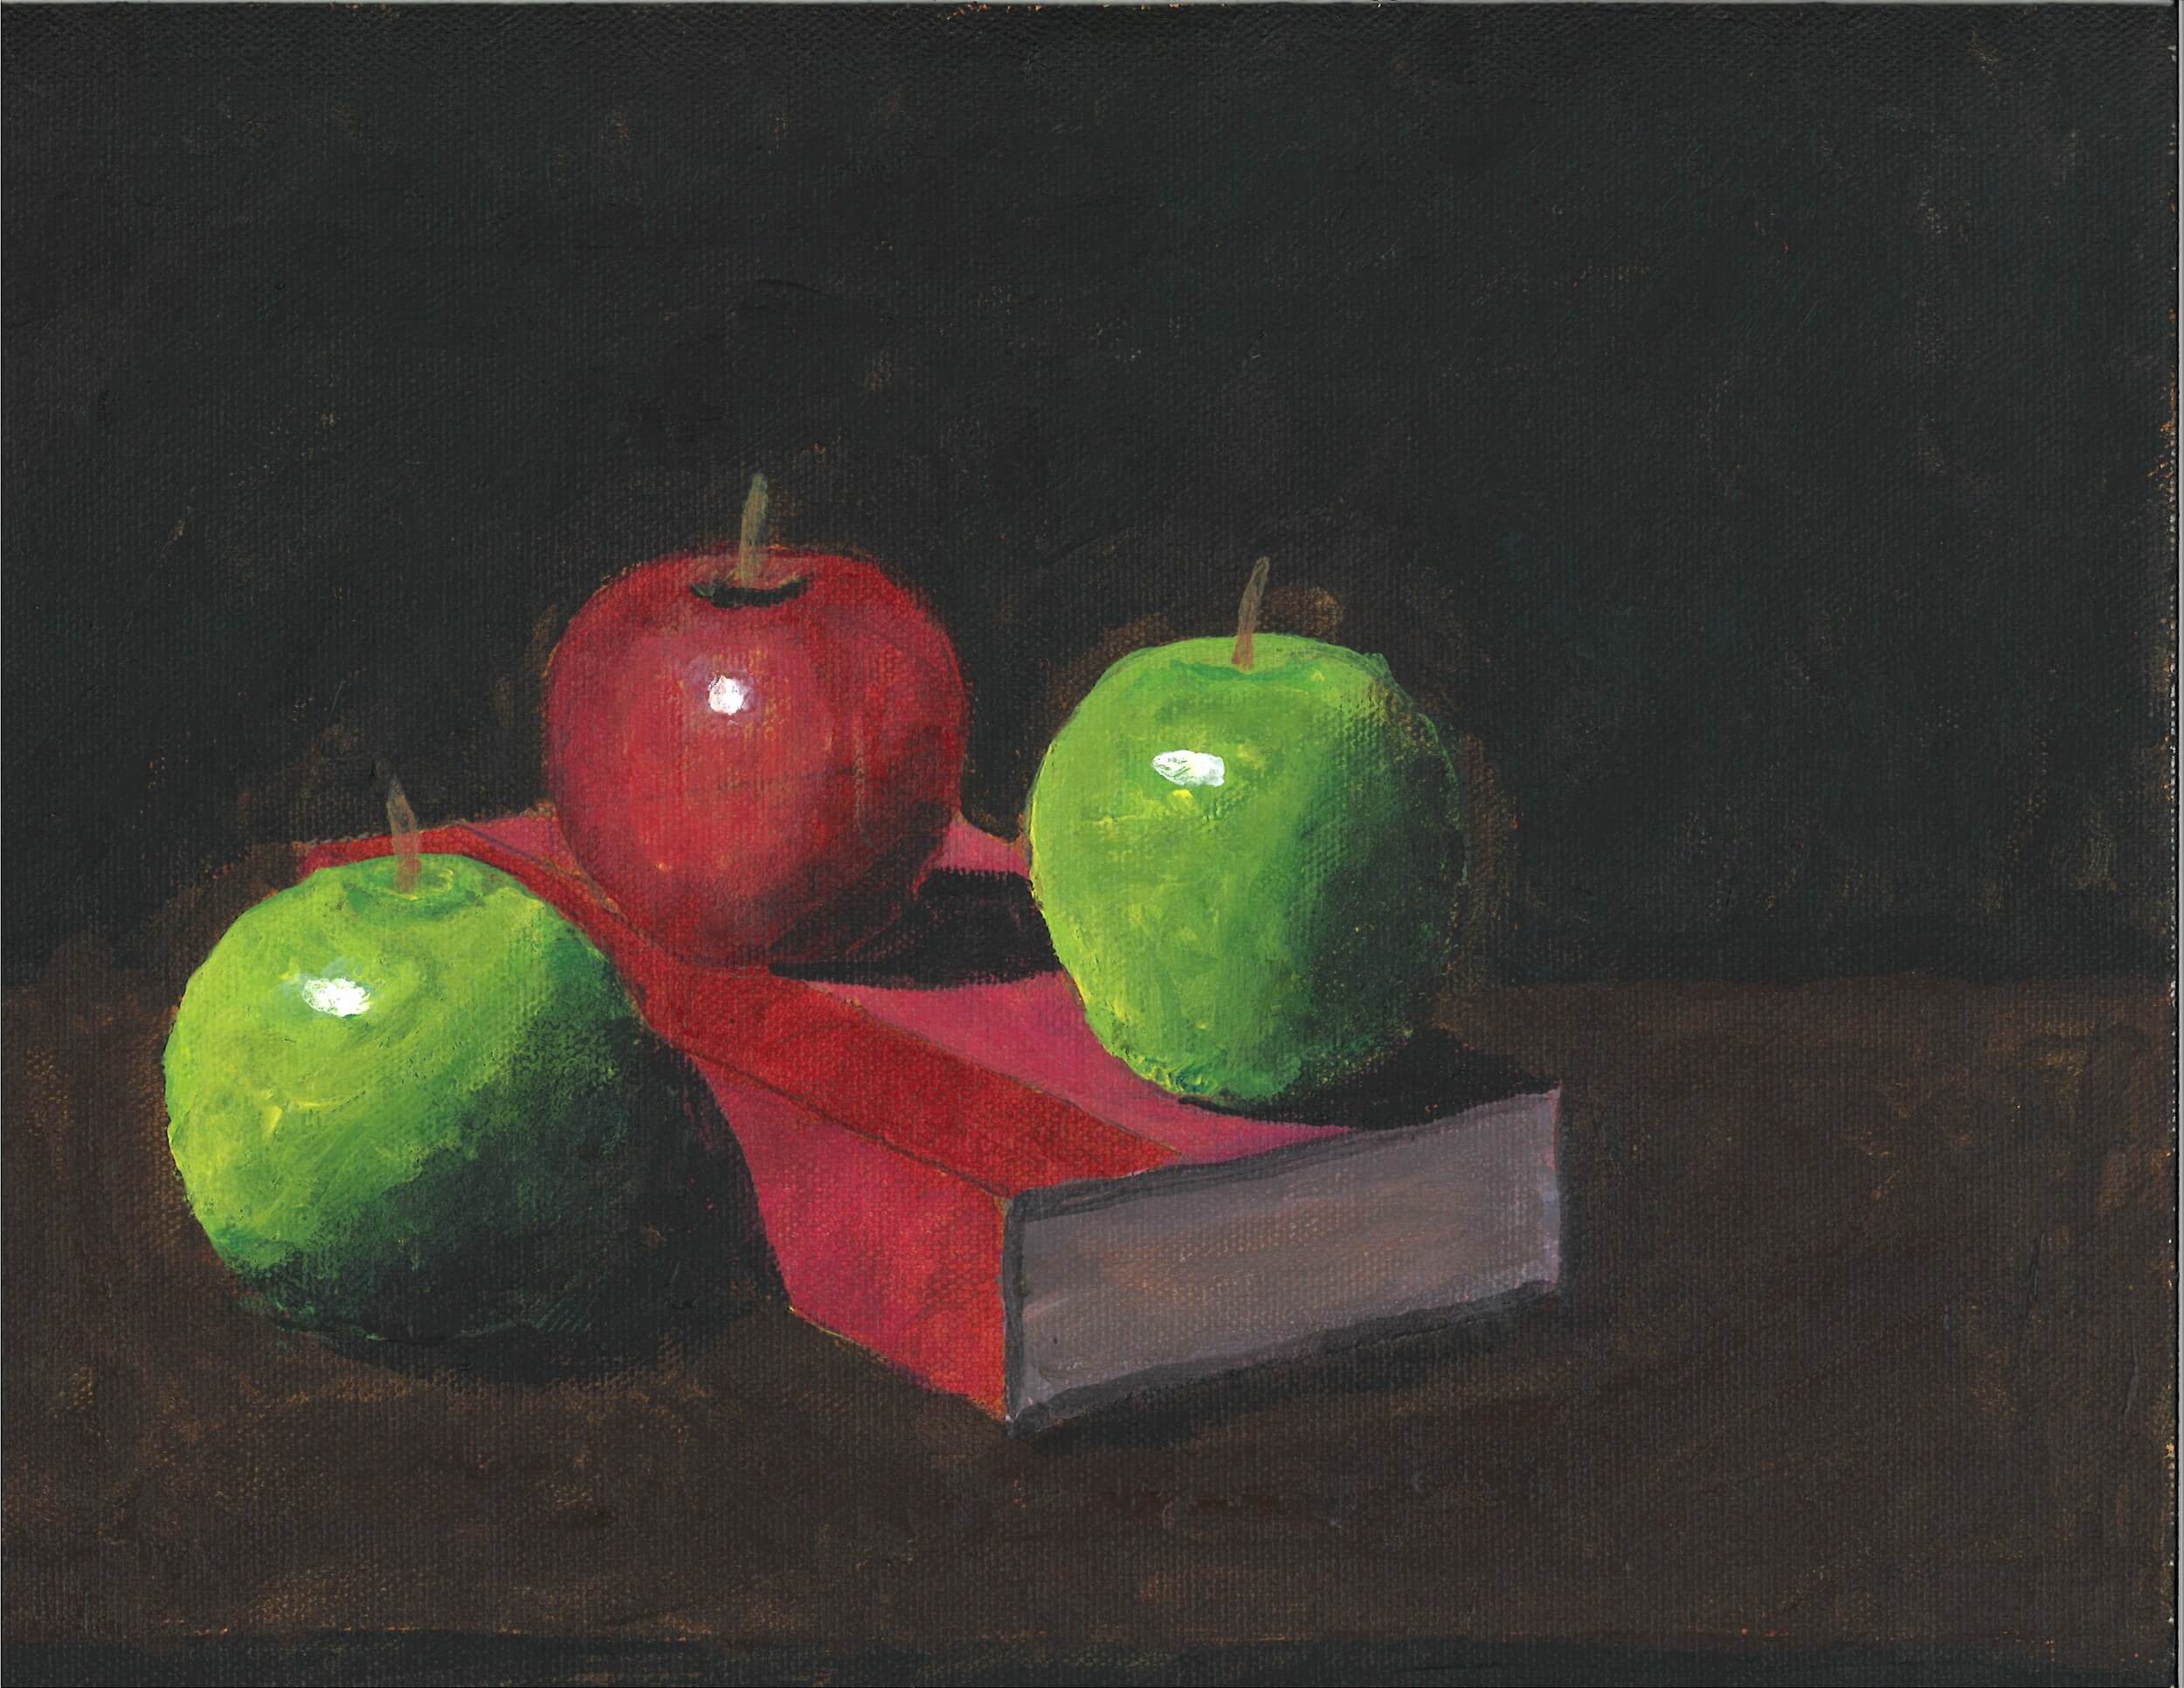 Art work completed by a Utah Charter student - Apples with book